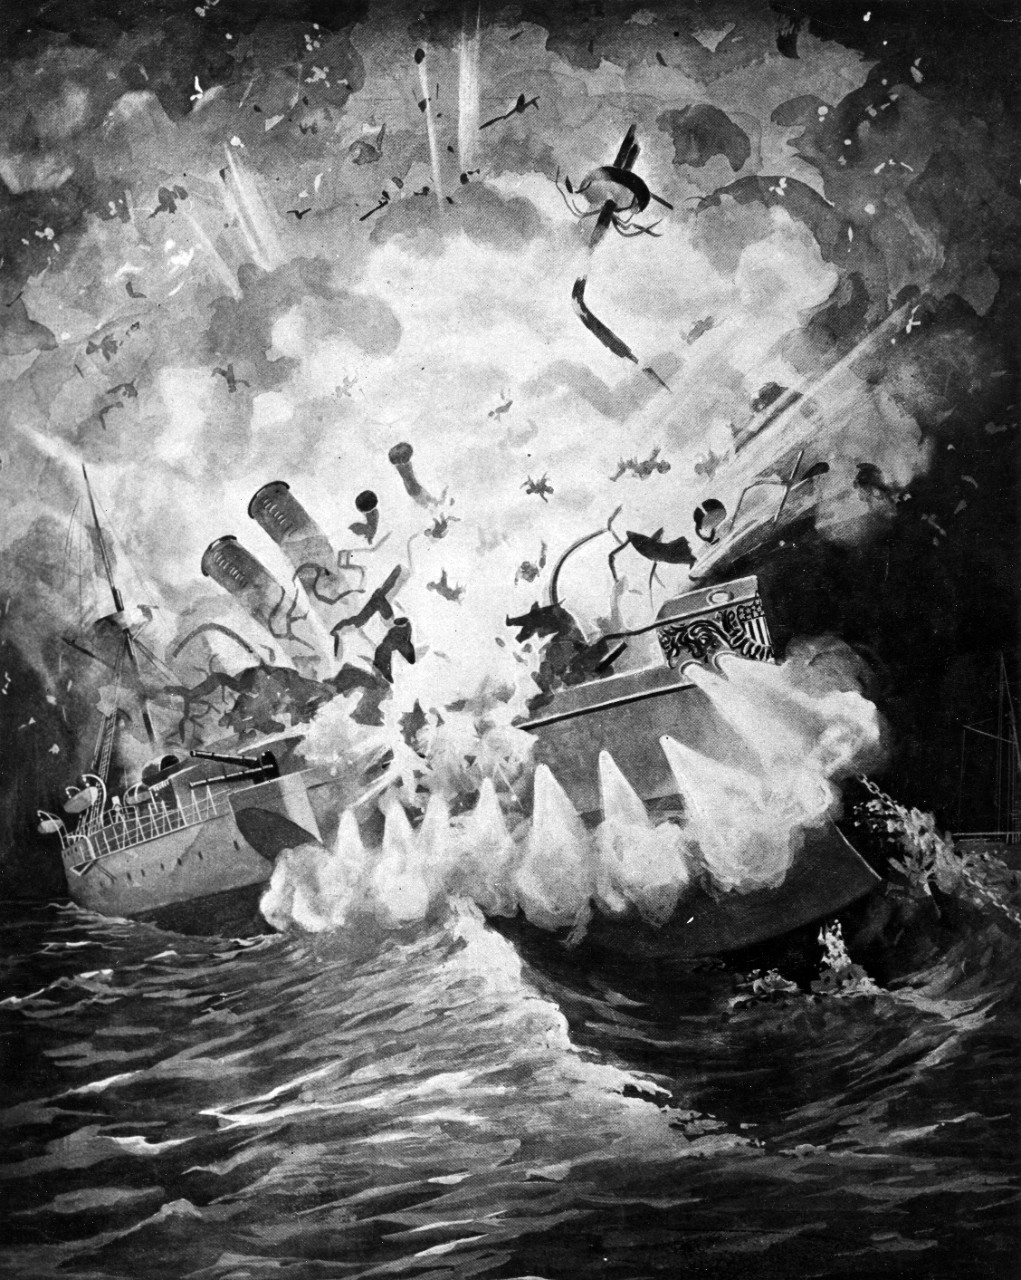 Drawing of the explosion of battleship Maine